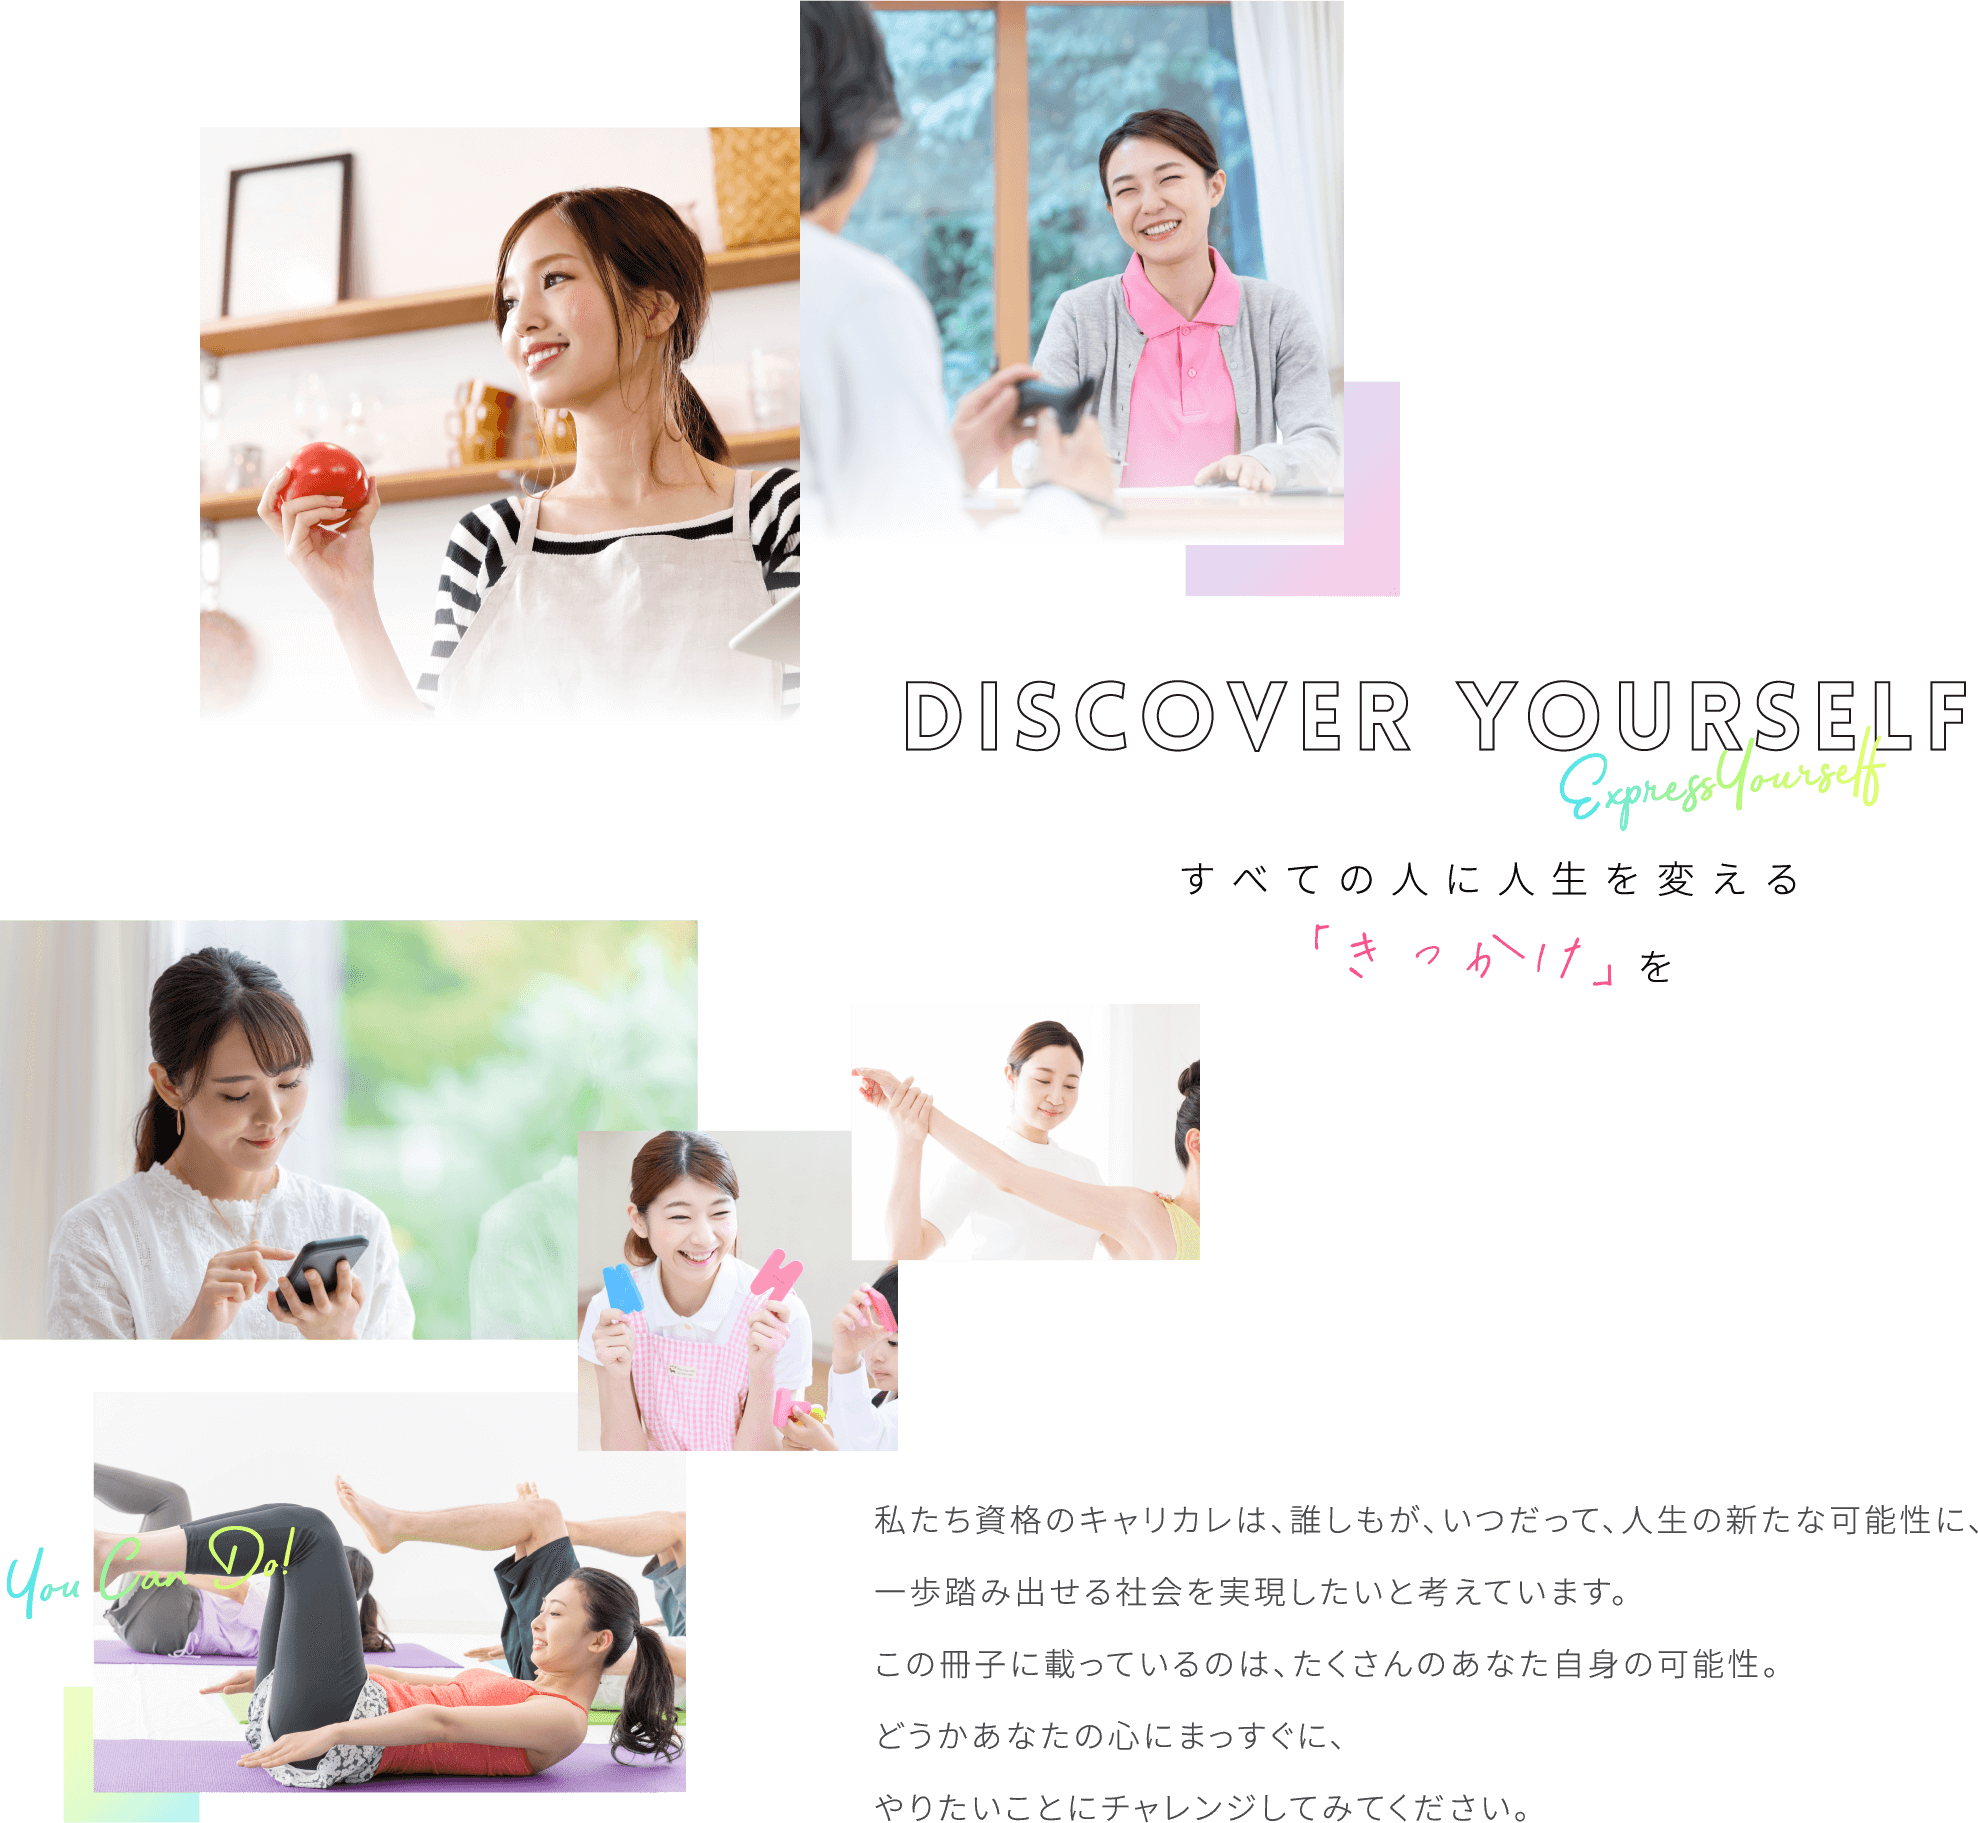 DISCOVER YOURSELF